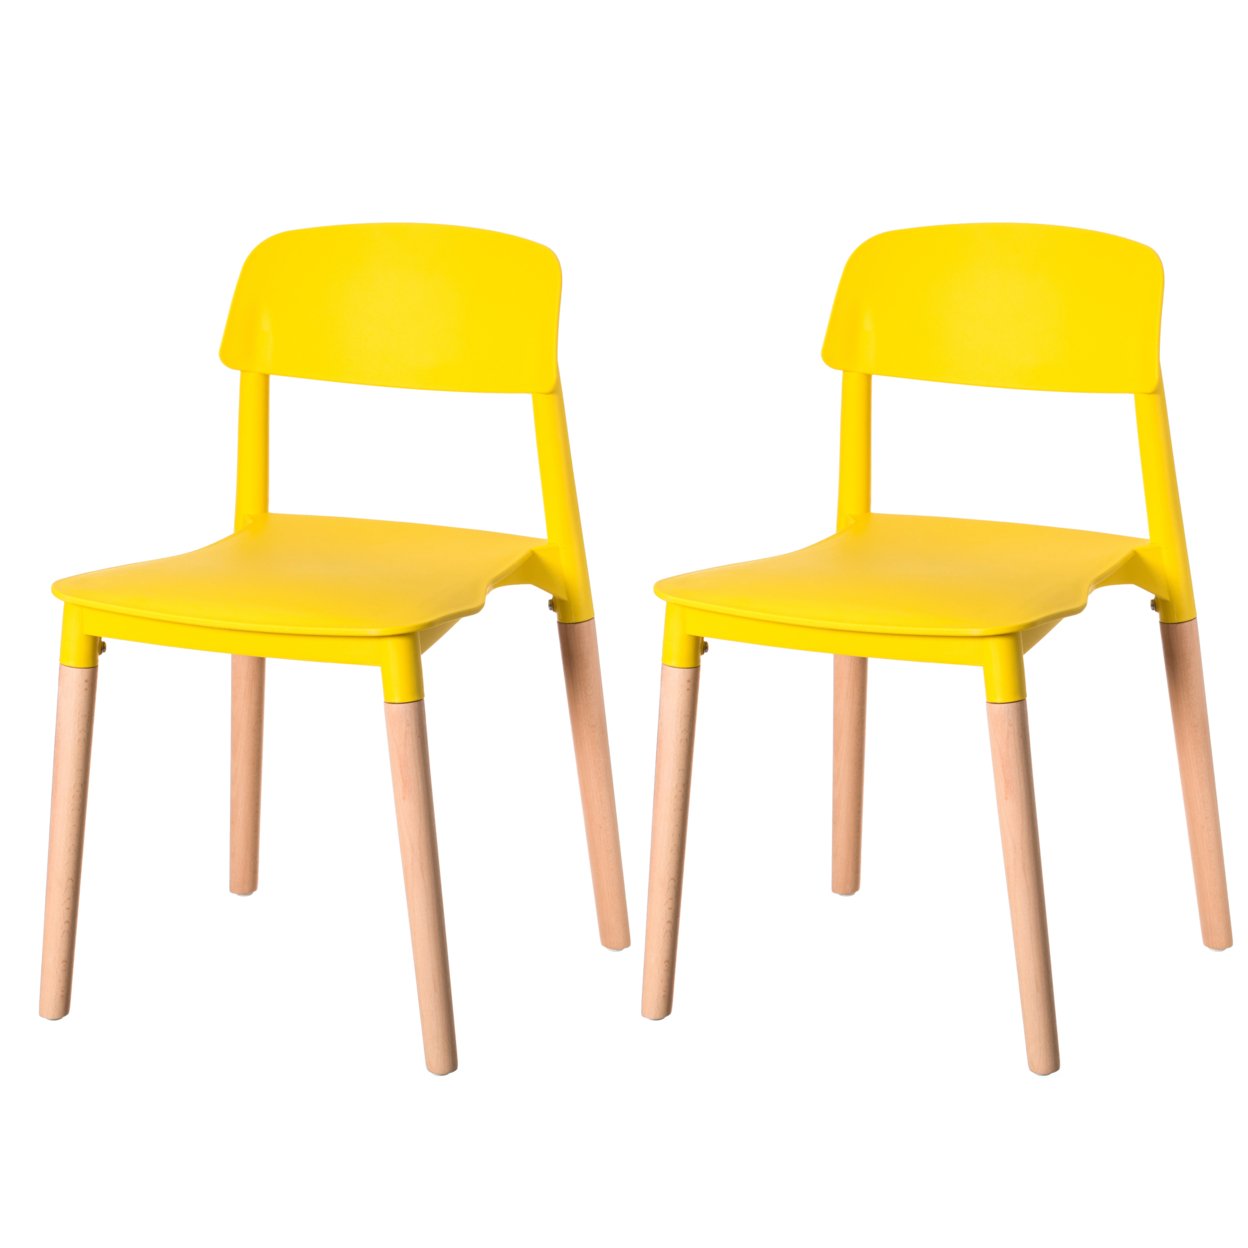 Modern Plastic Dining Chair Open Back With Beech Wood Legs - Set Of 2 Yellow